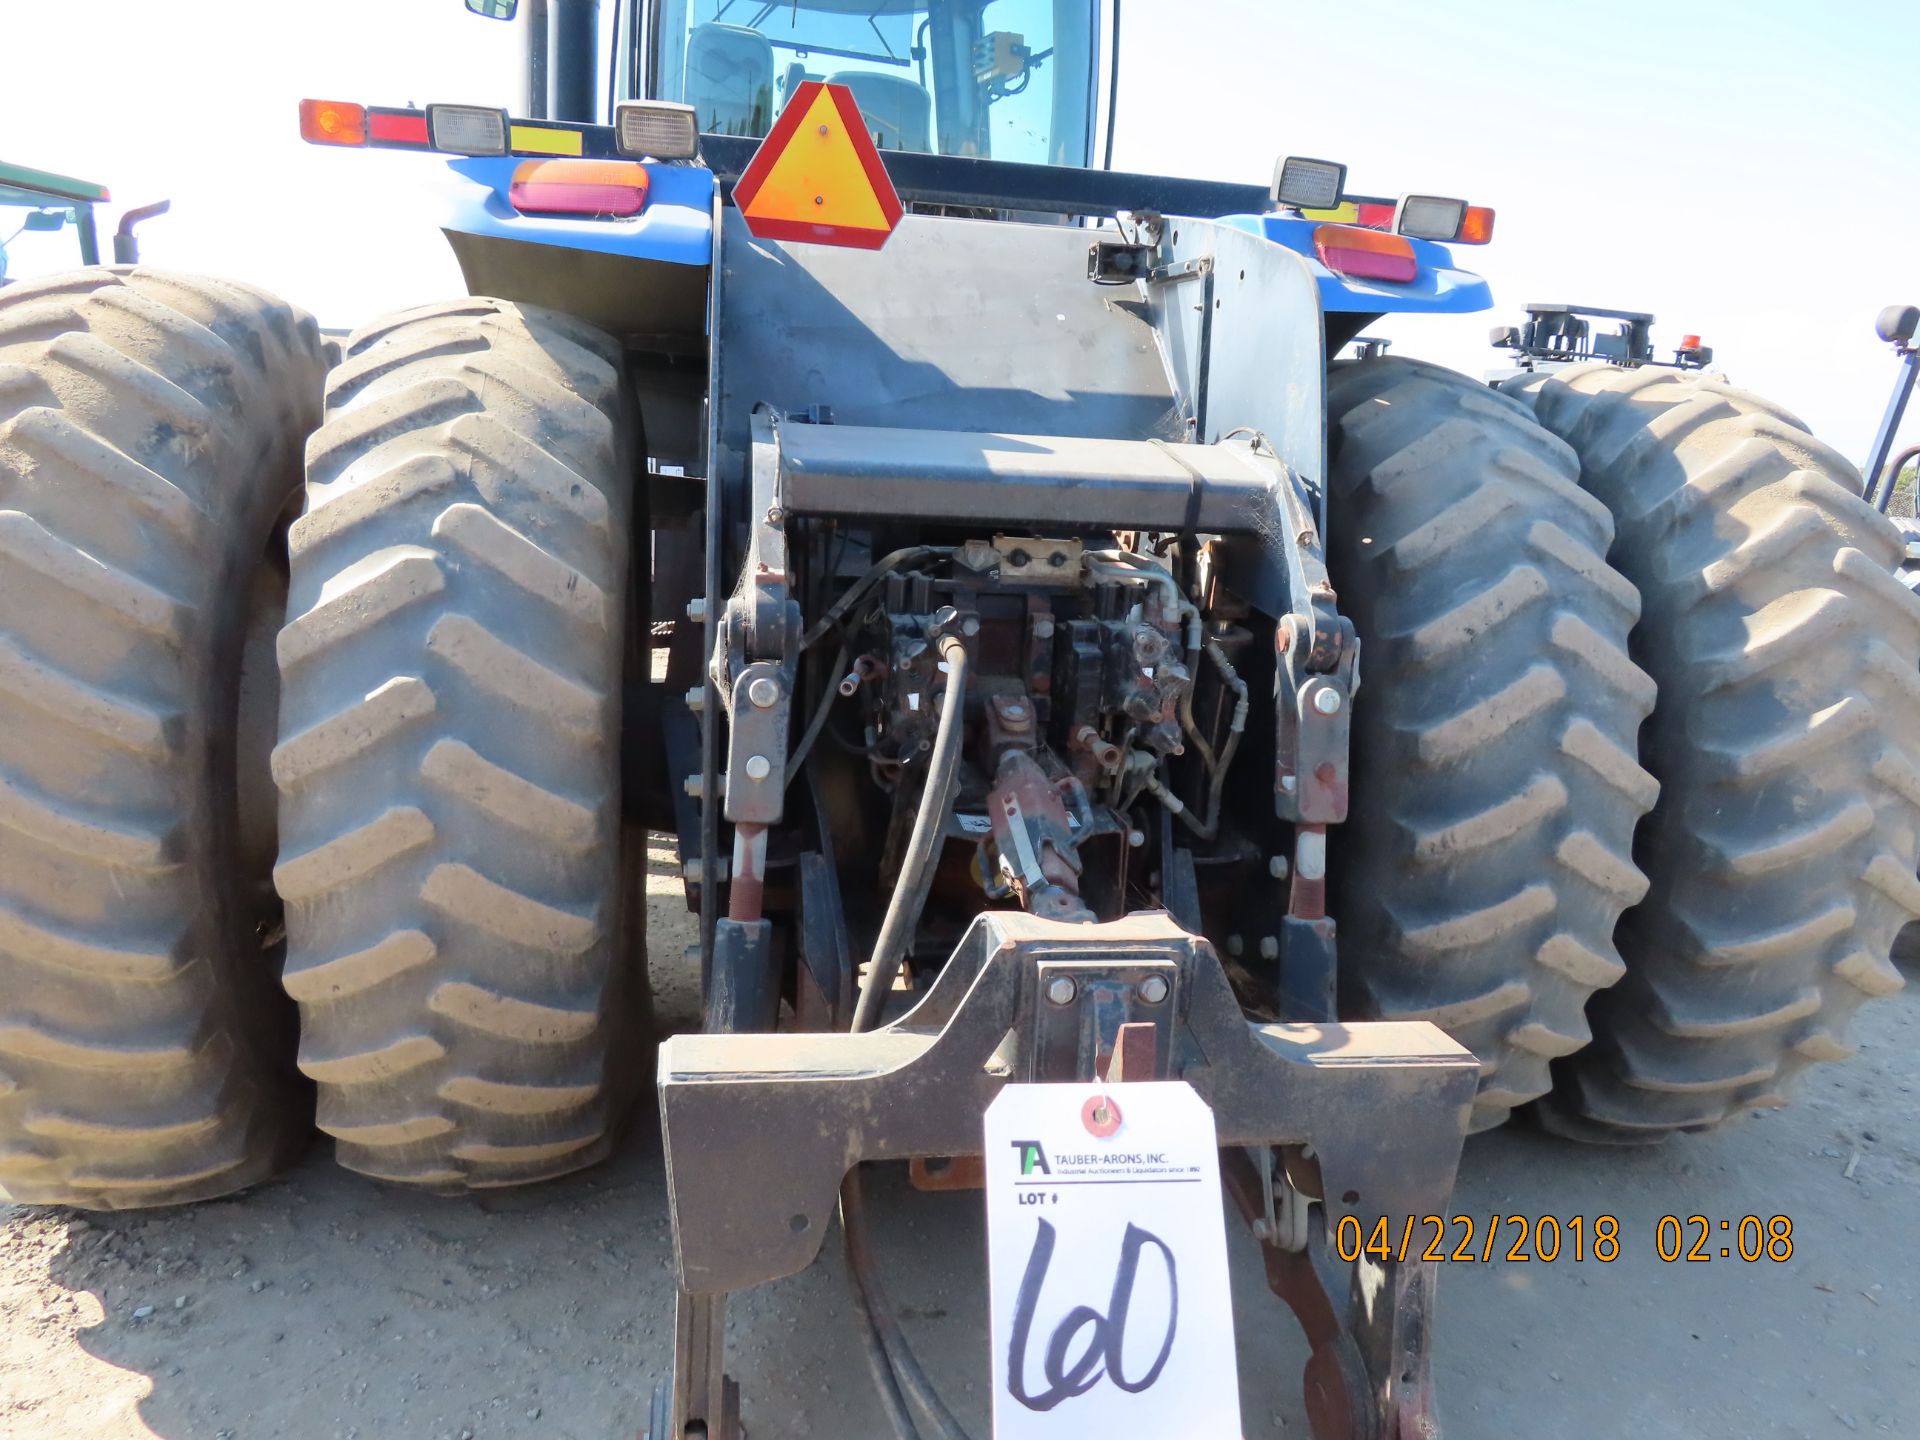 (2006) New Holland mod. TJ380, Tractor, 4-WD Diesel, PIN: Z6F200243; Hours: 7,216 w/ Nunes 16' Laser - Image 5 of 15